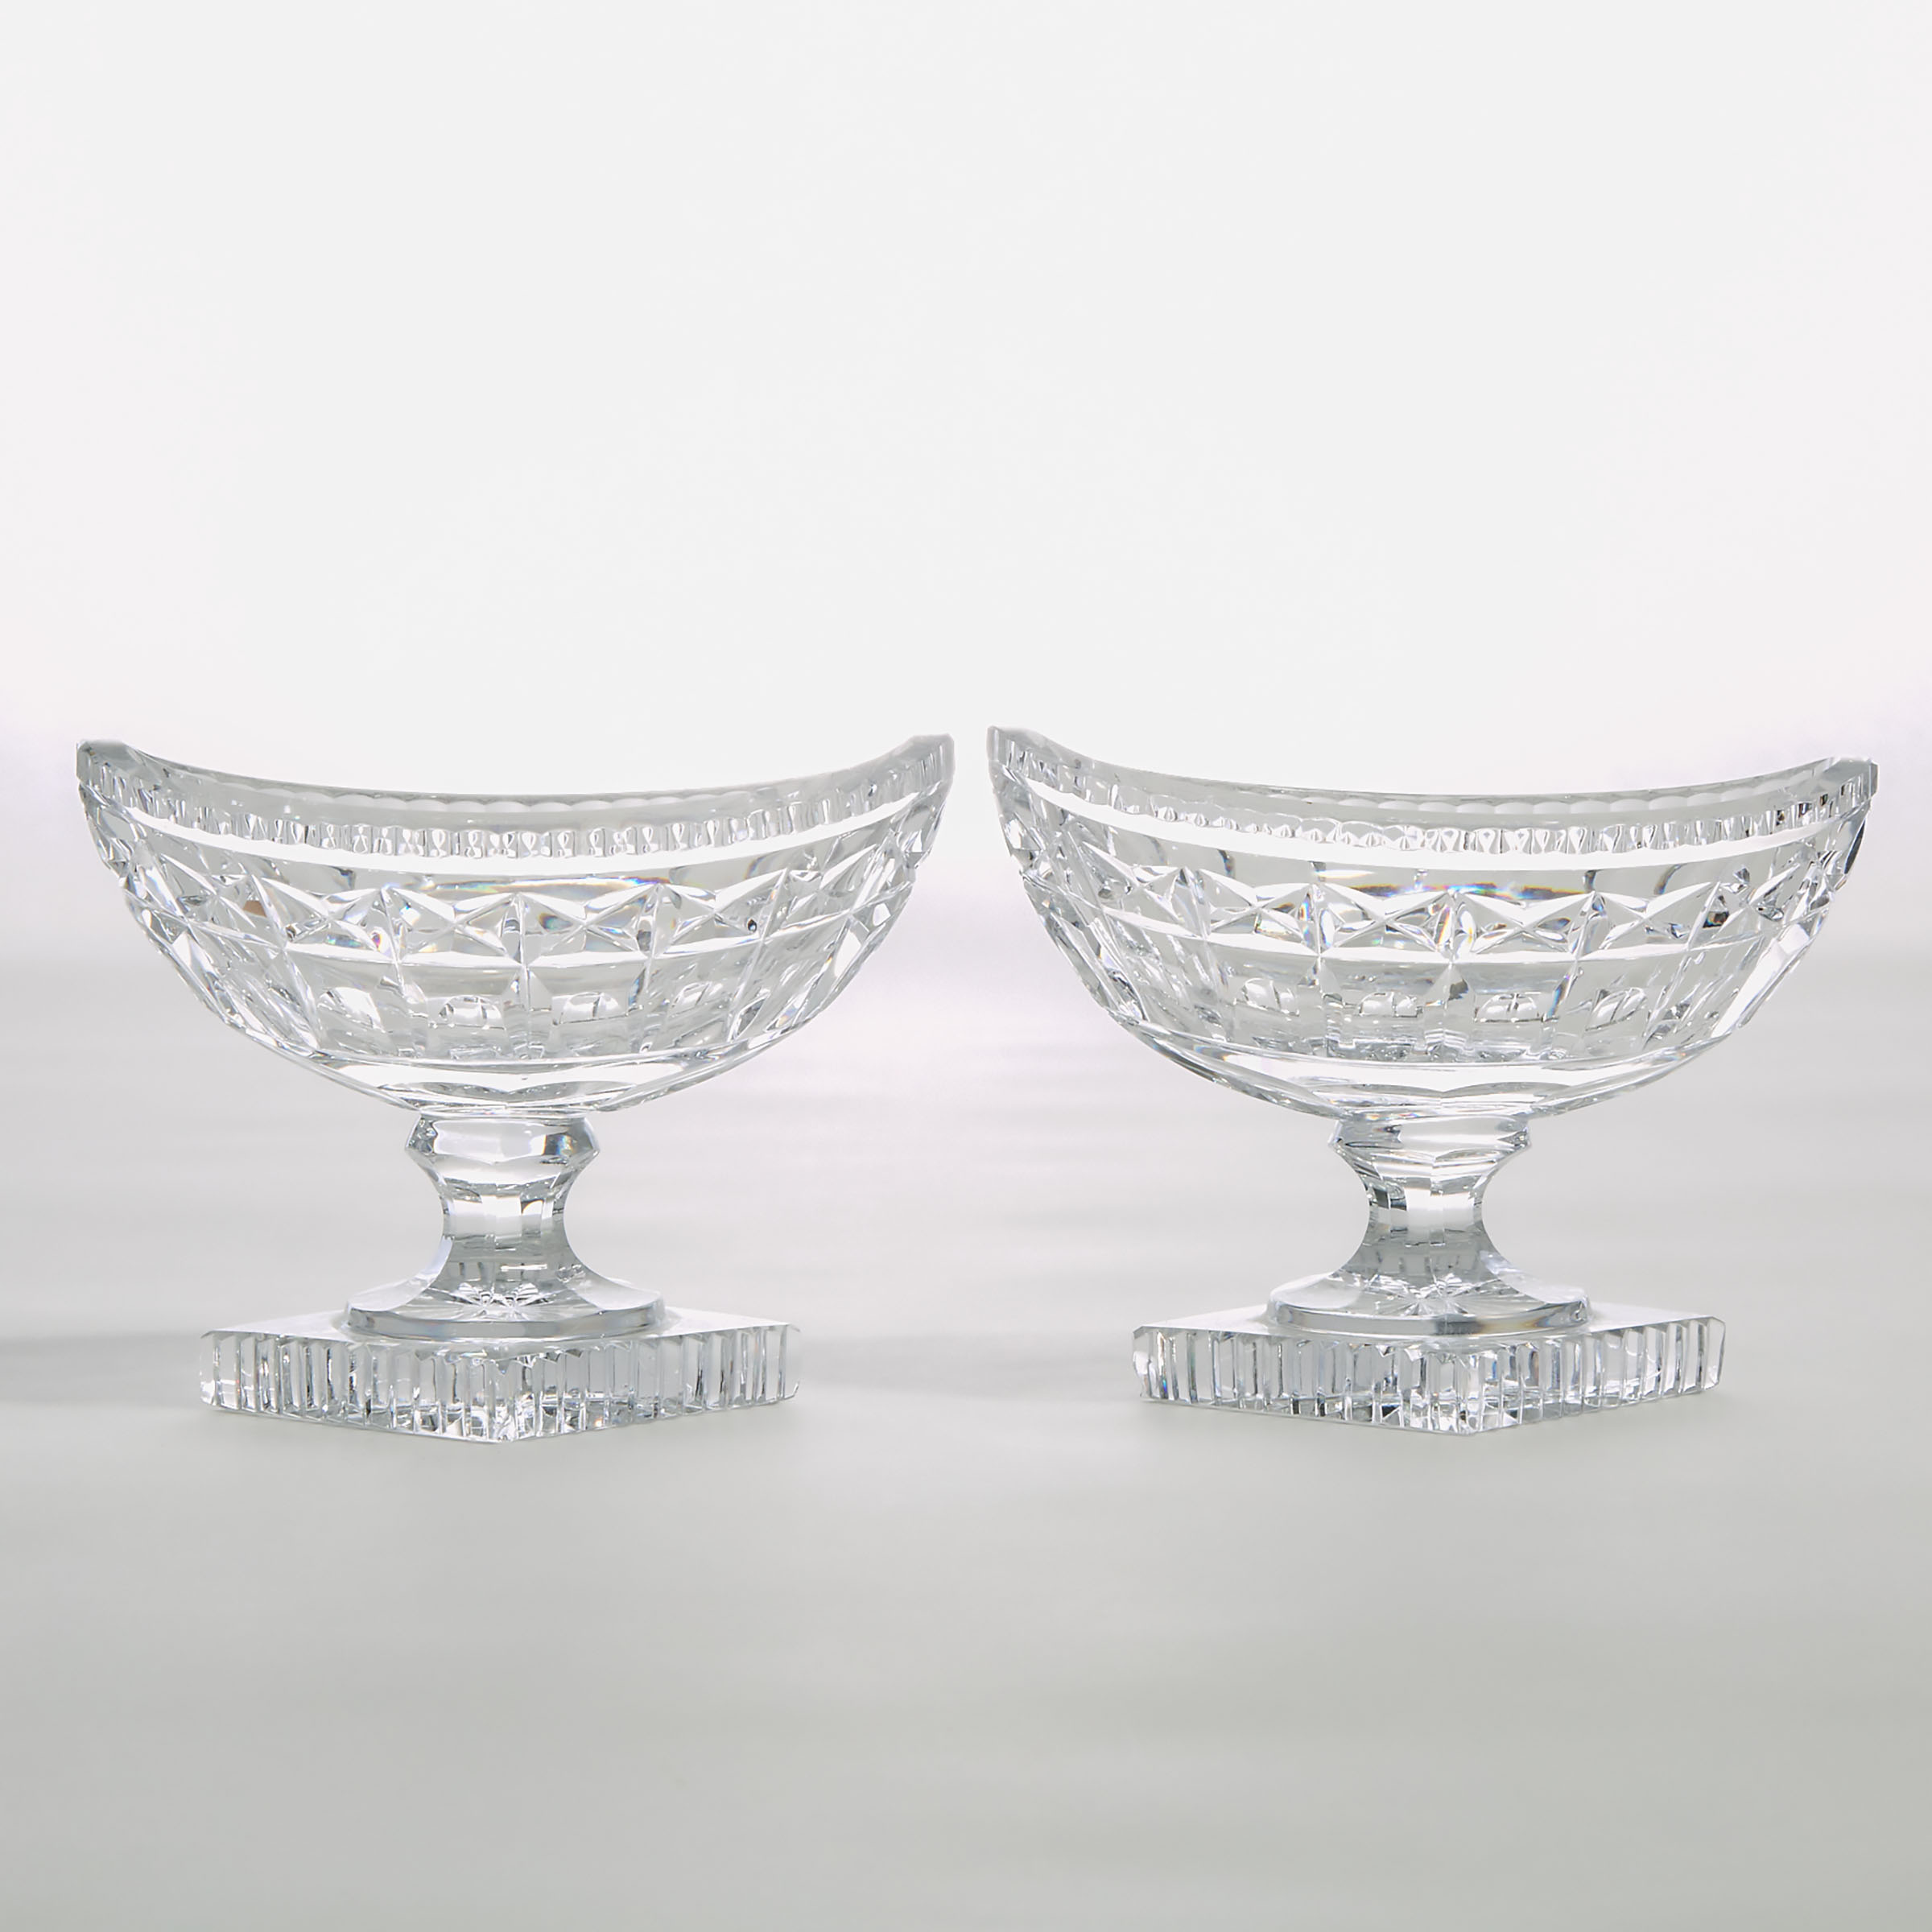 Pair of Anglo-Irish Style Cut Glass Small Pedestal-Footed Oval Bowls, 20th century